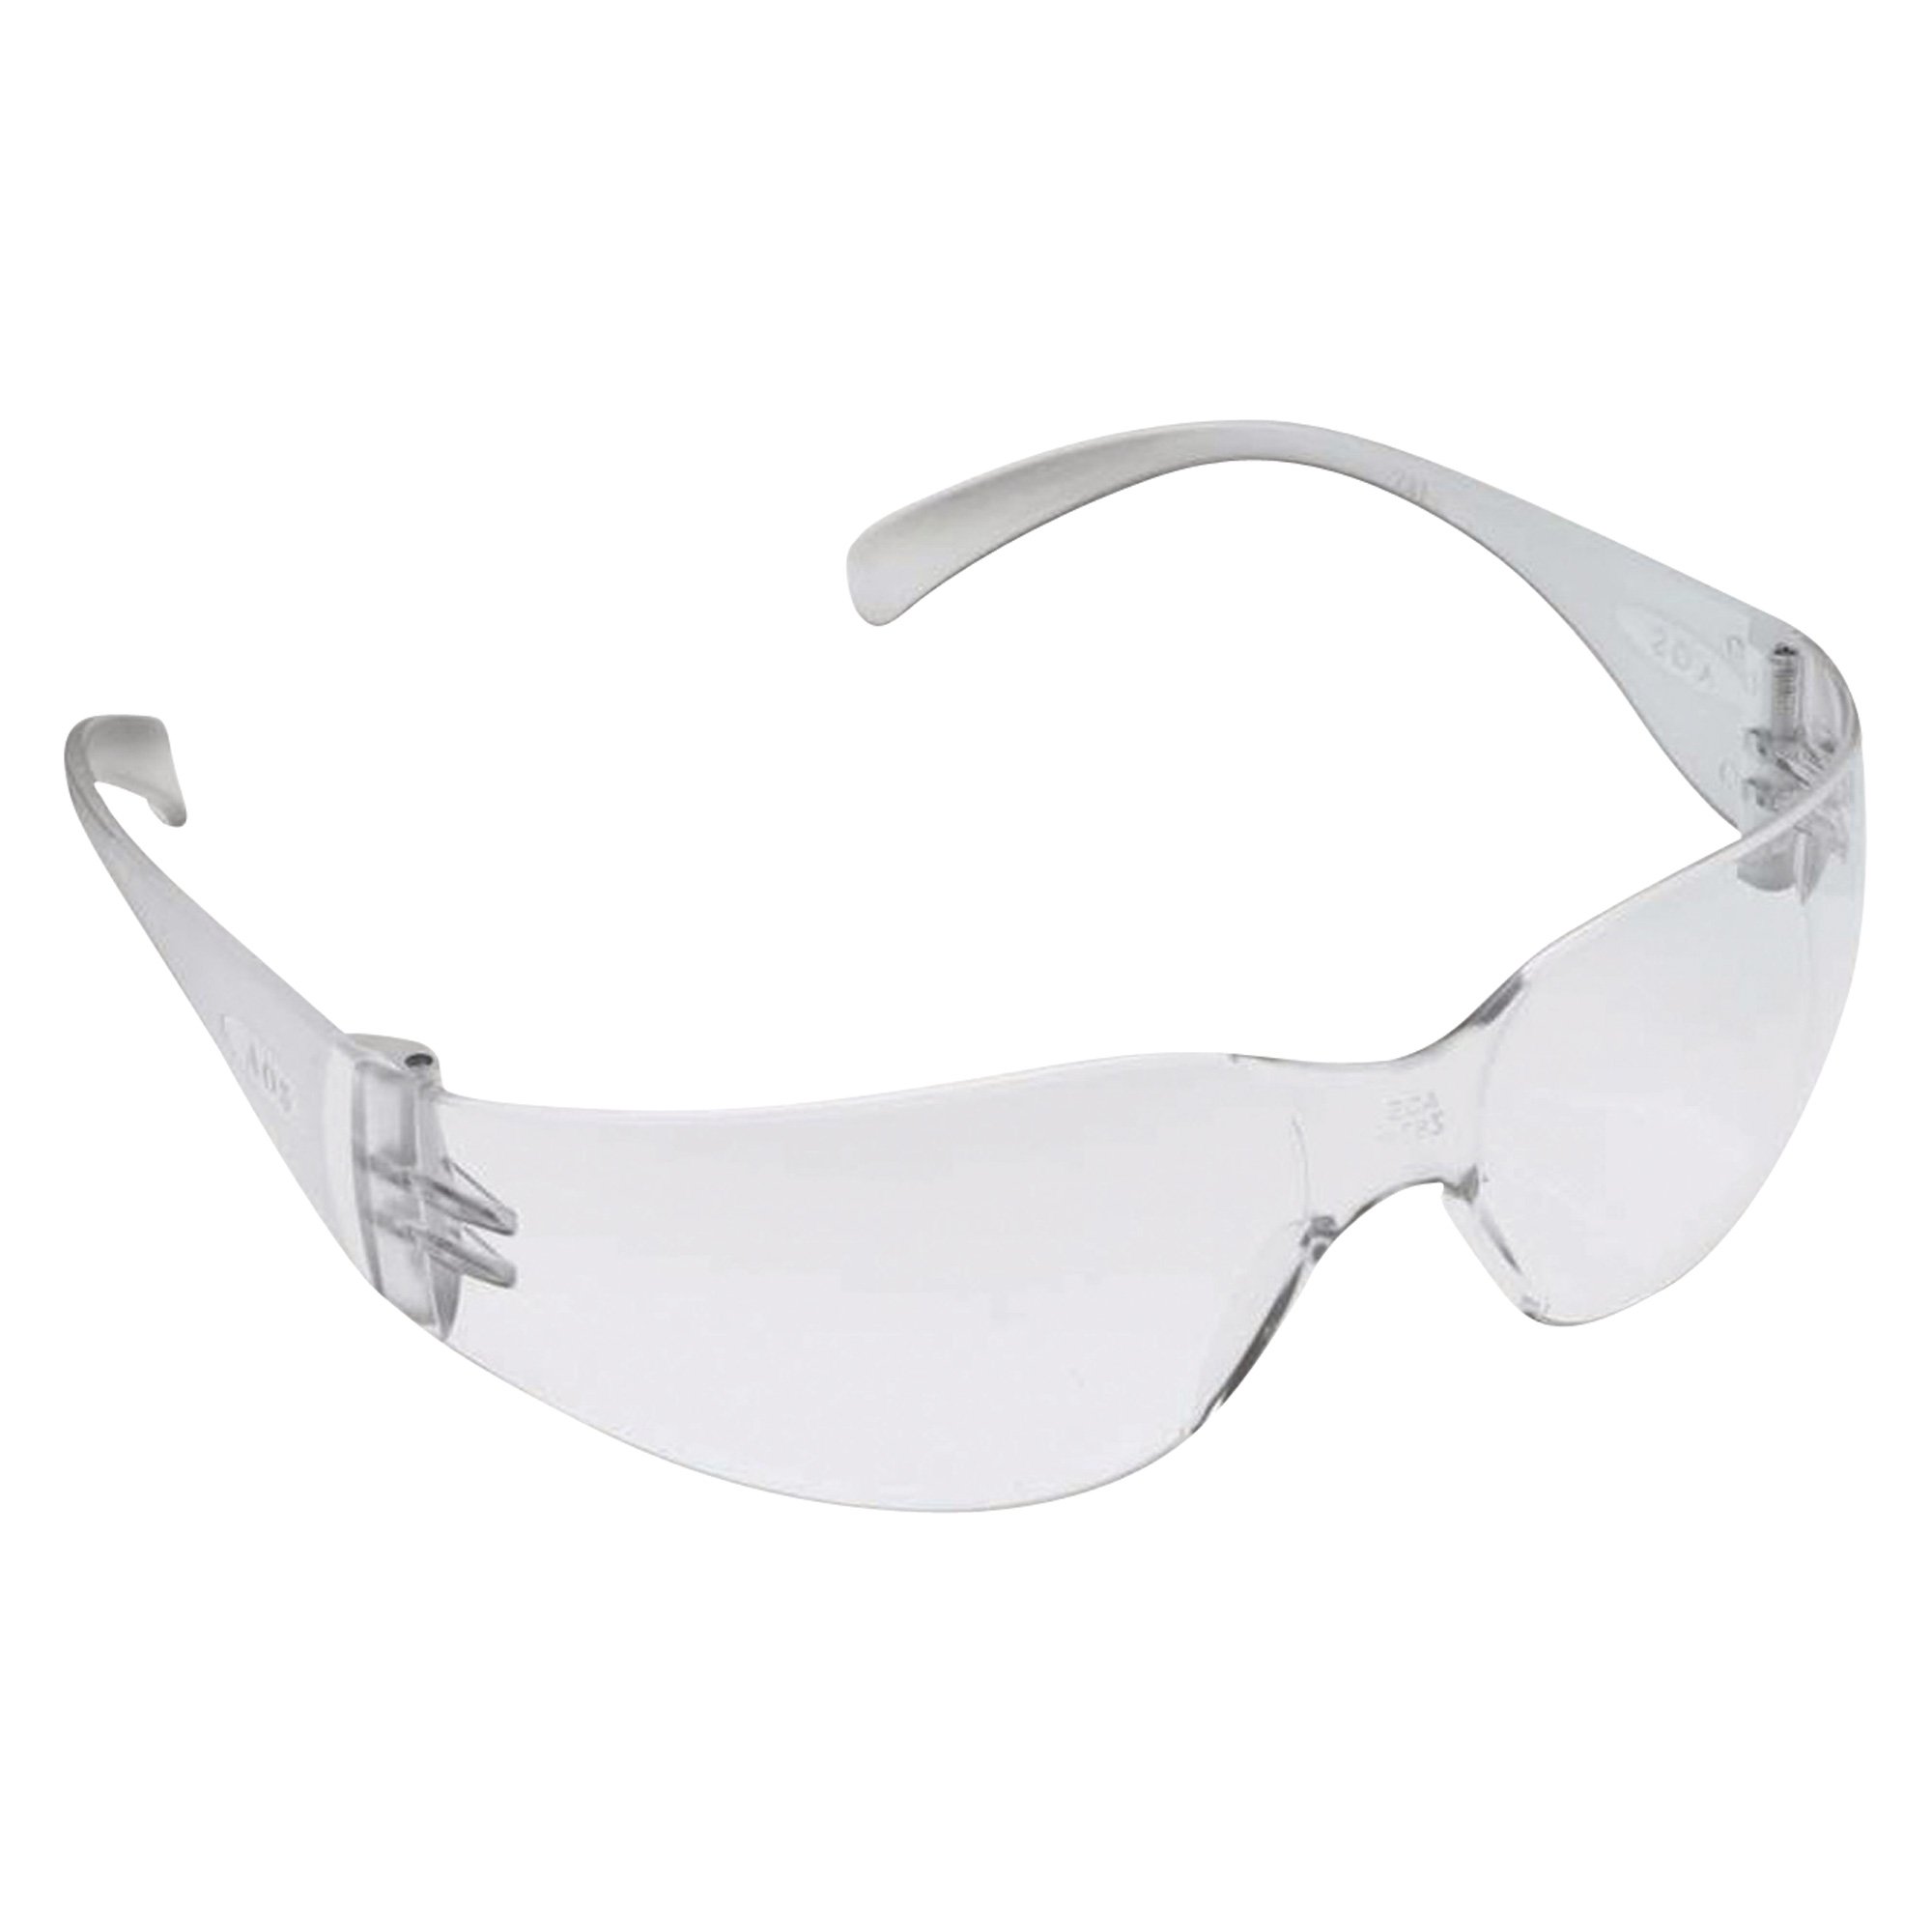 3M Virtua Protective Safety Glasses — Clear Lens, Model# 11228-00000 ...